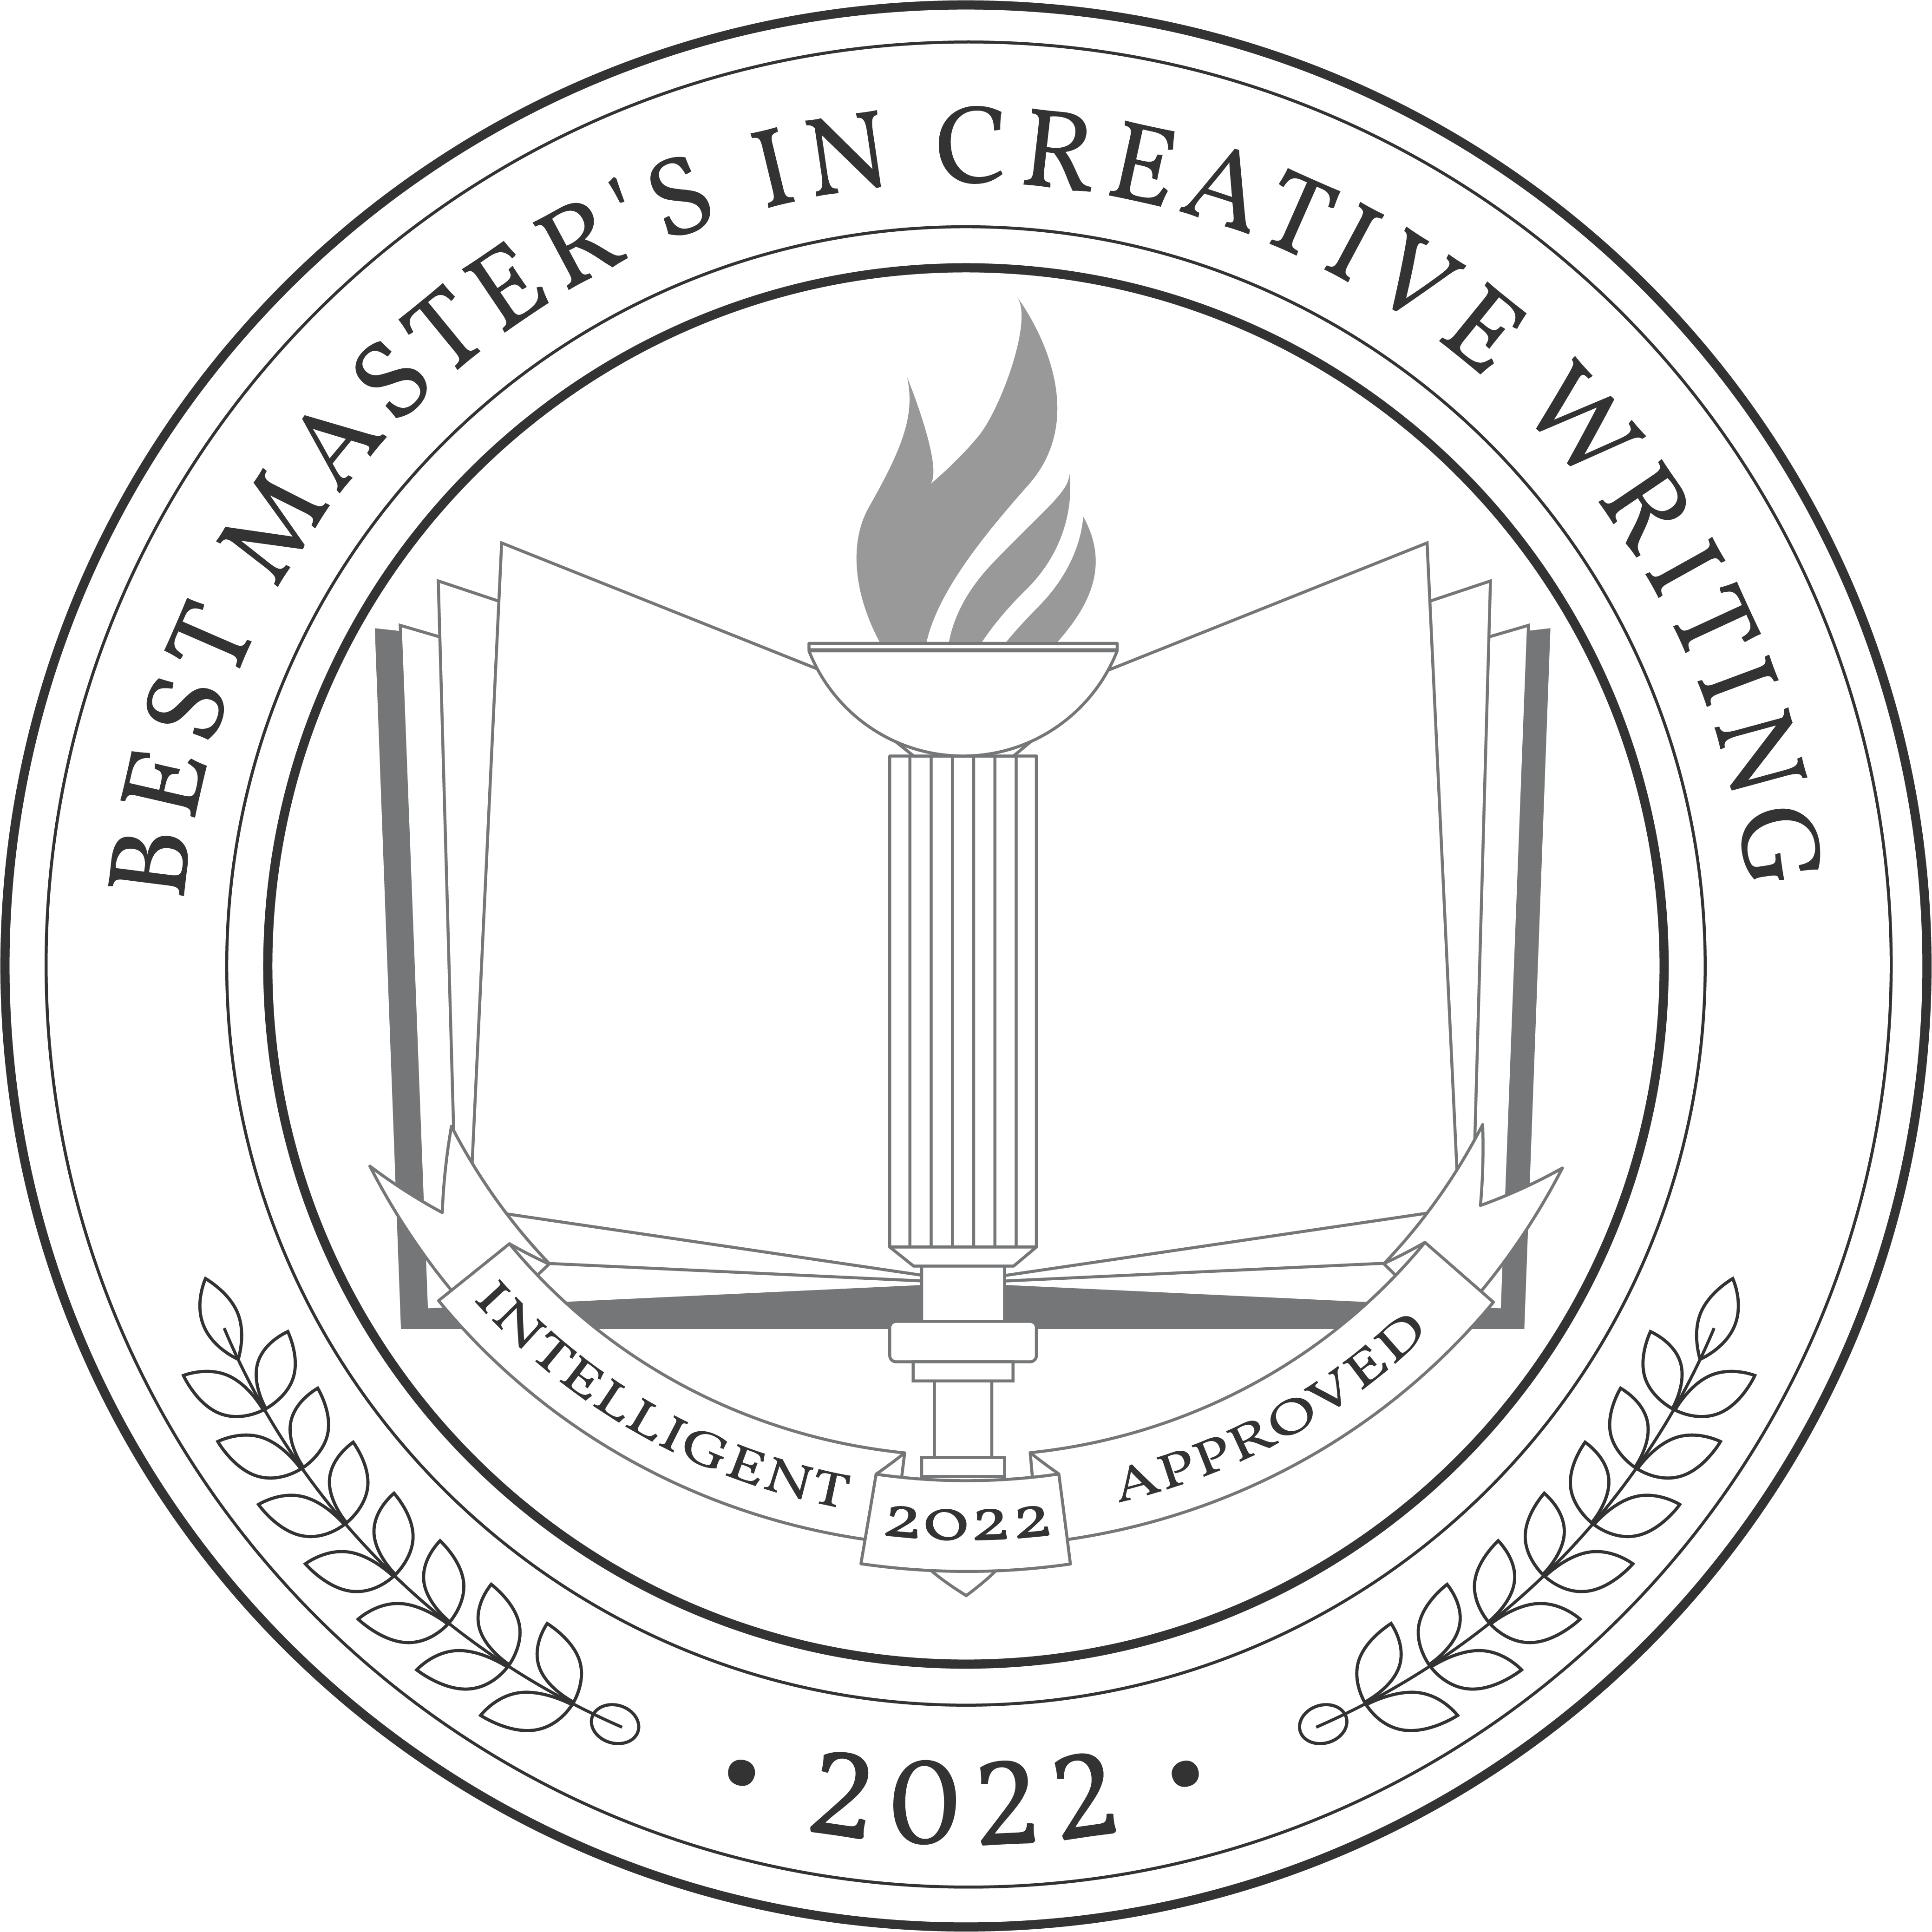 Best Masters in Creative Writing Badge